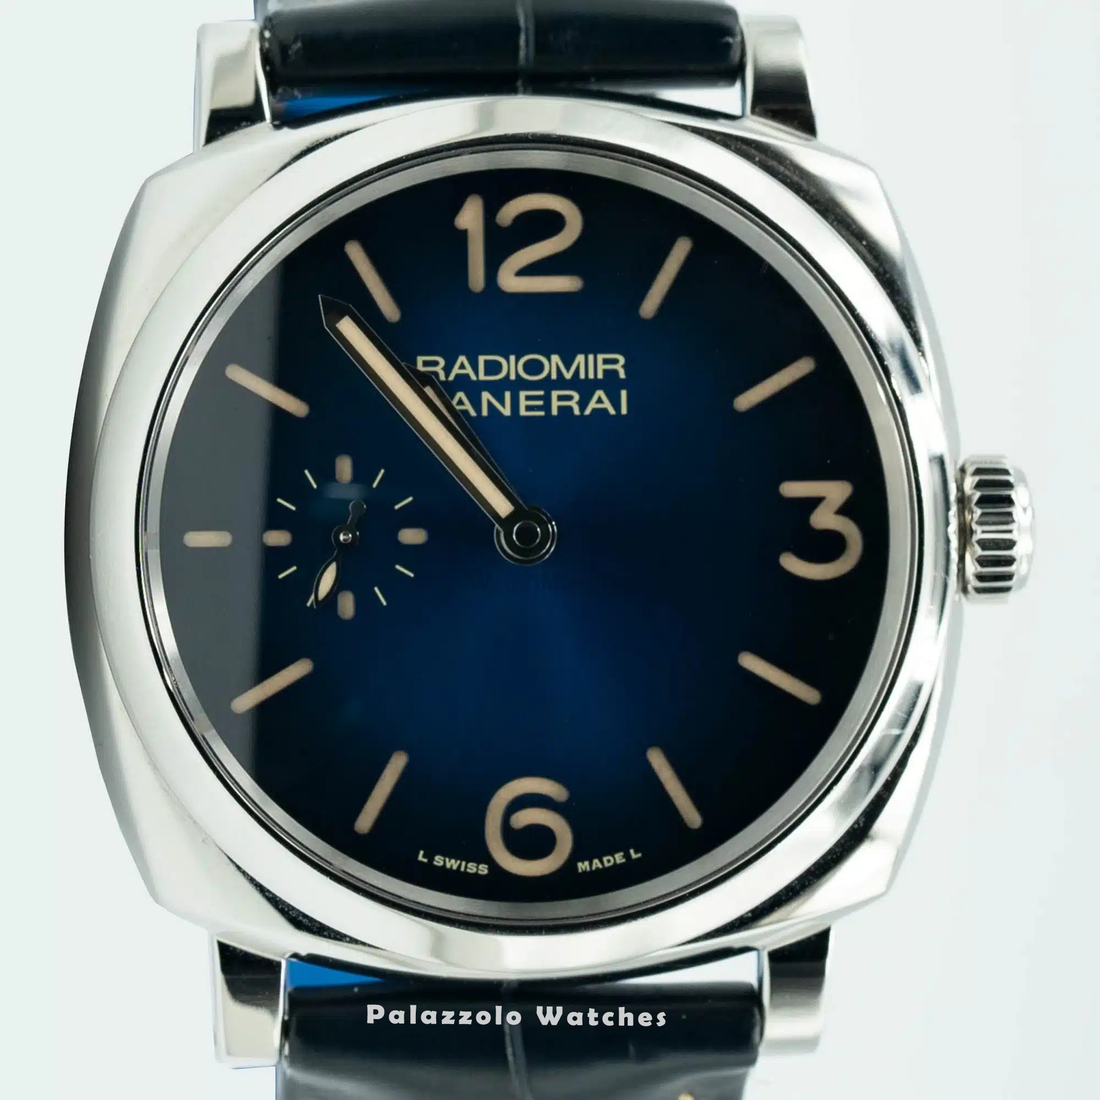 Panerai Radiomir PAM01144 with Blue Dial - Palazzolo Watches